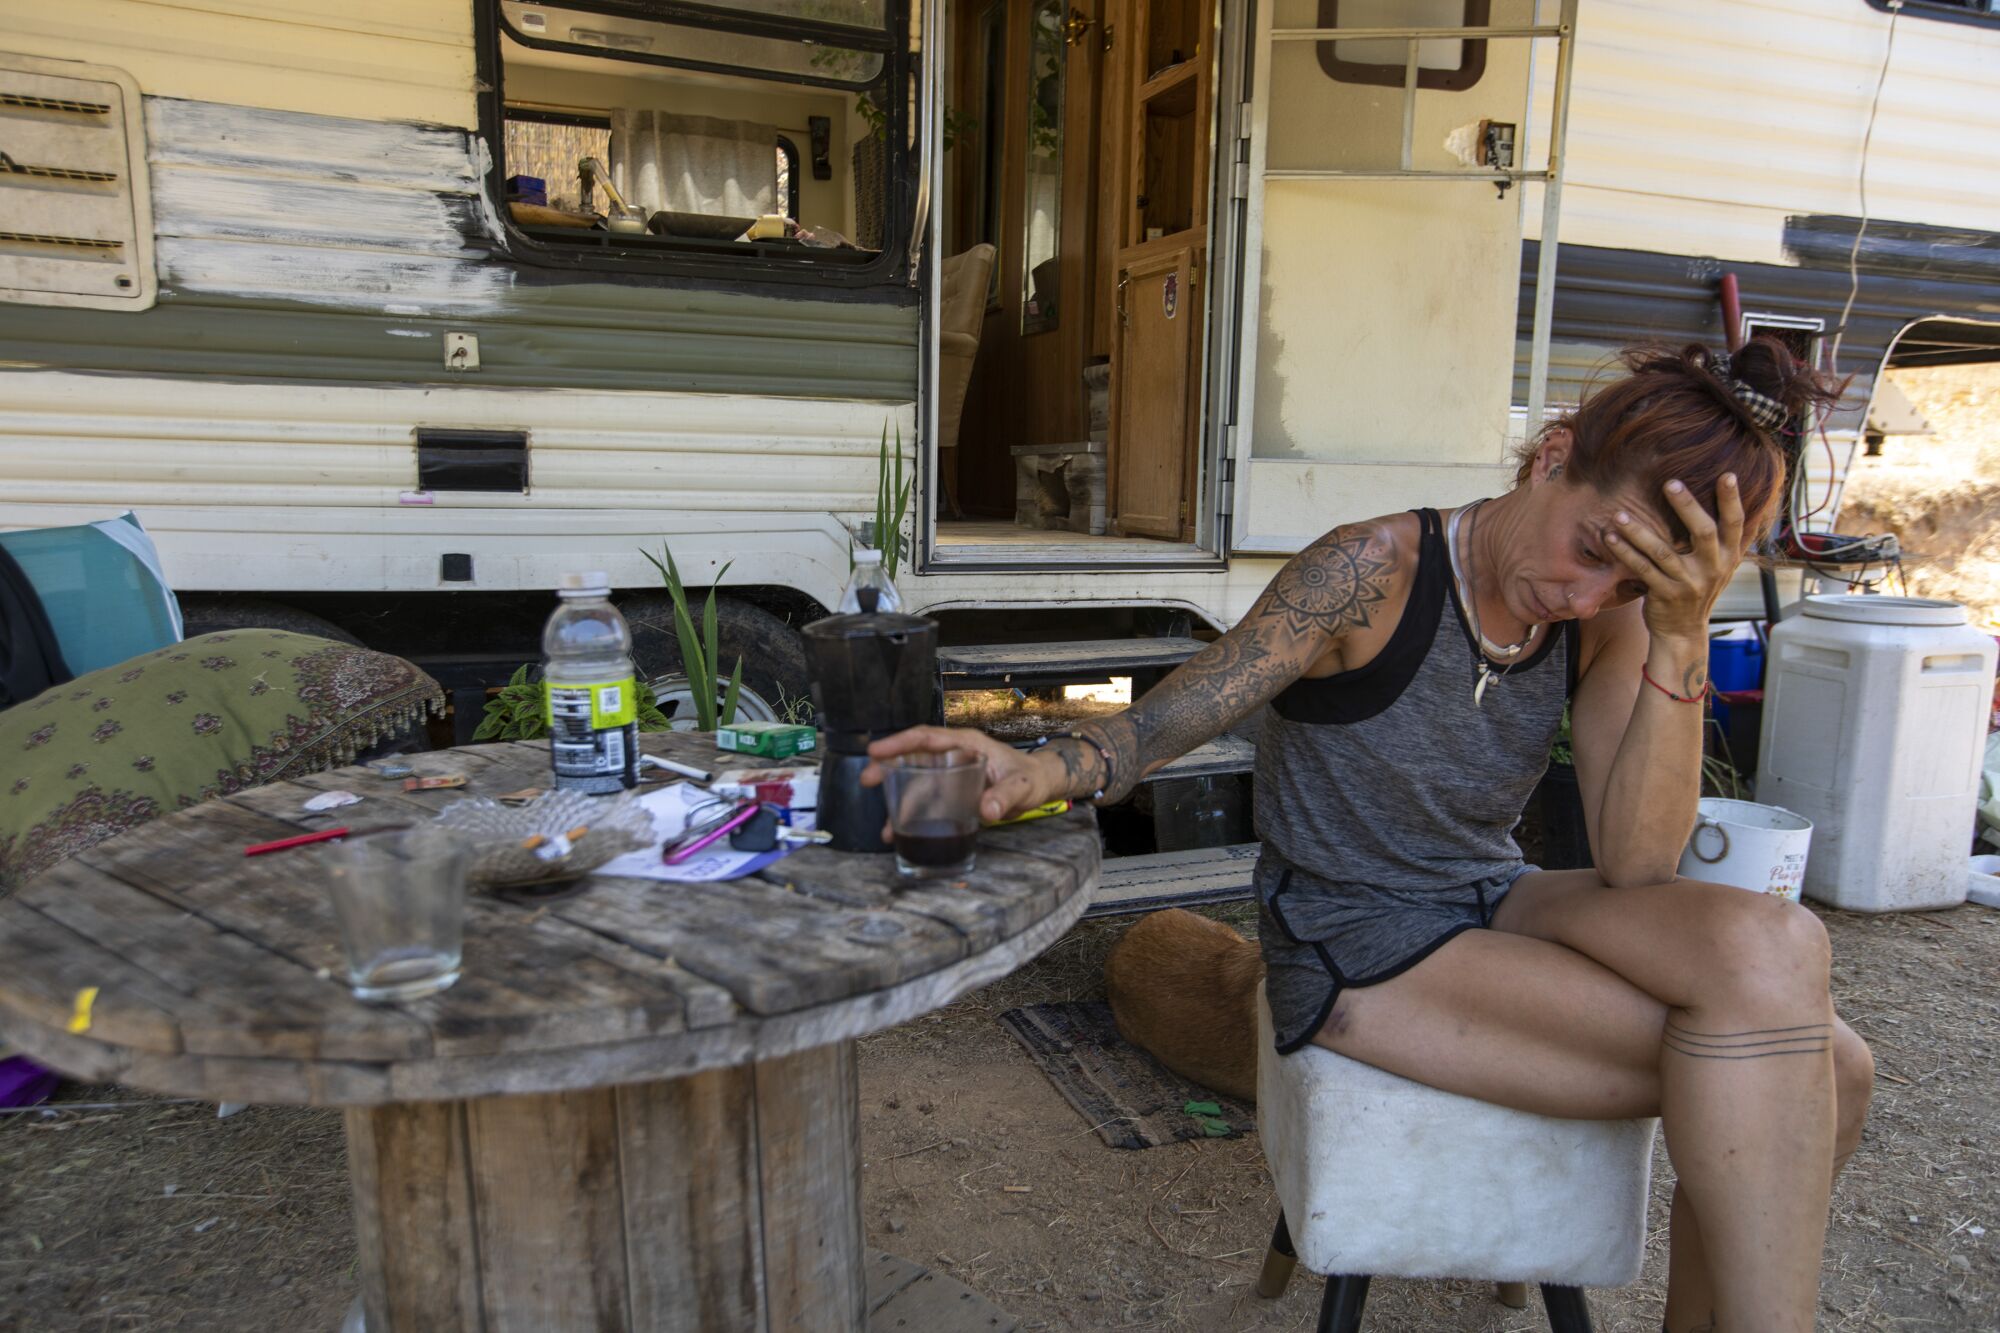 Sabrina, a cannabis worker, sits with a cup of coffee outside her trailer.